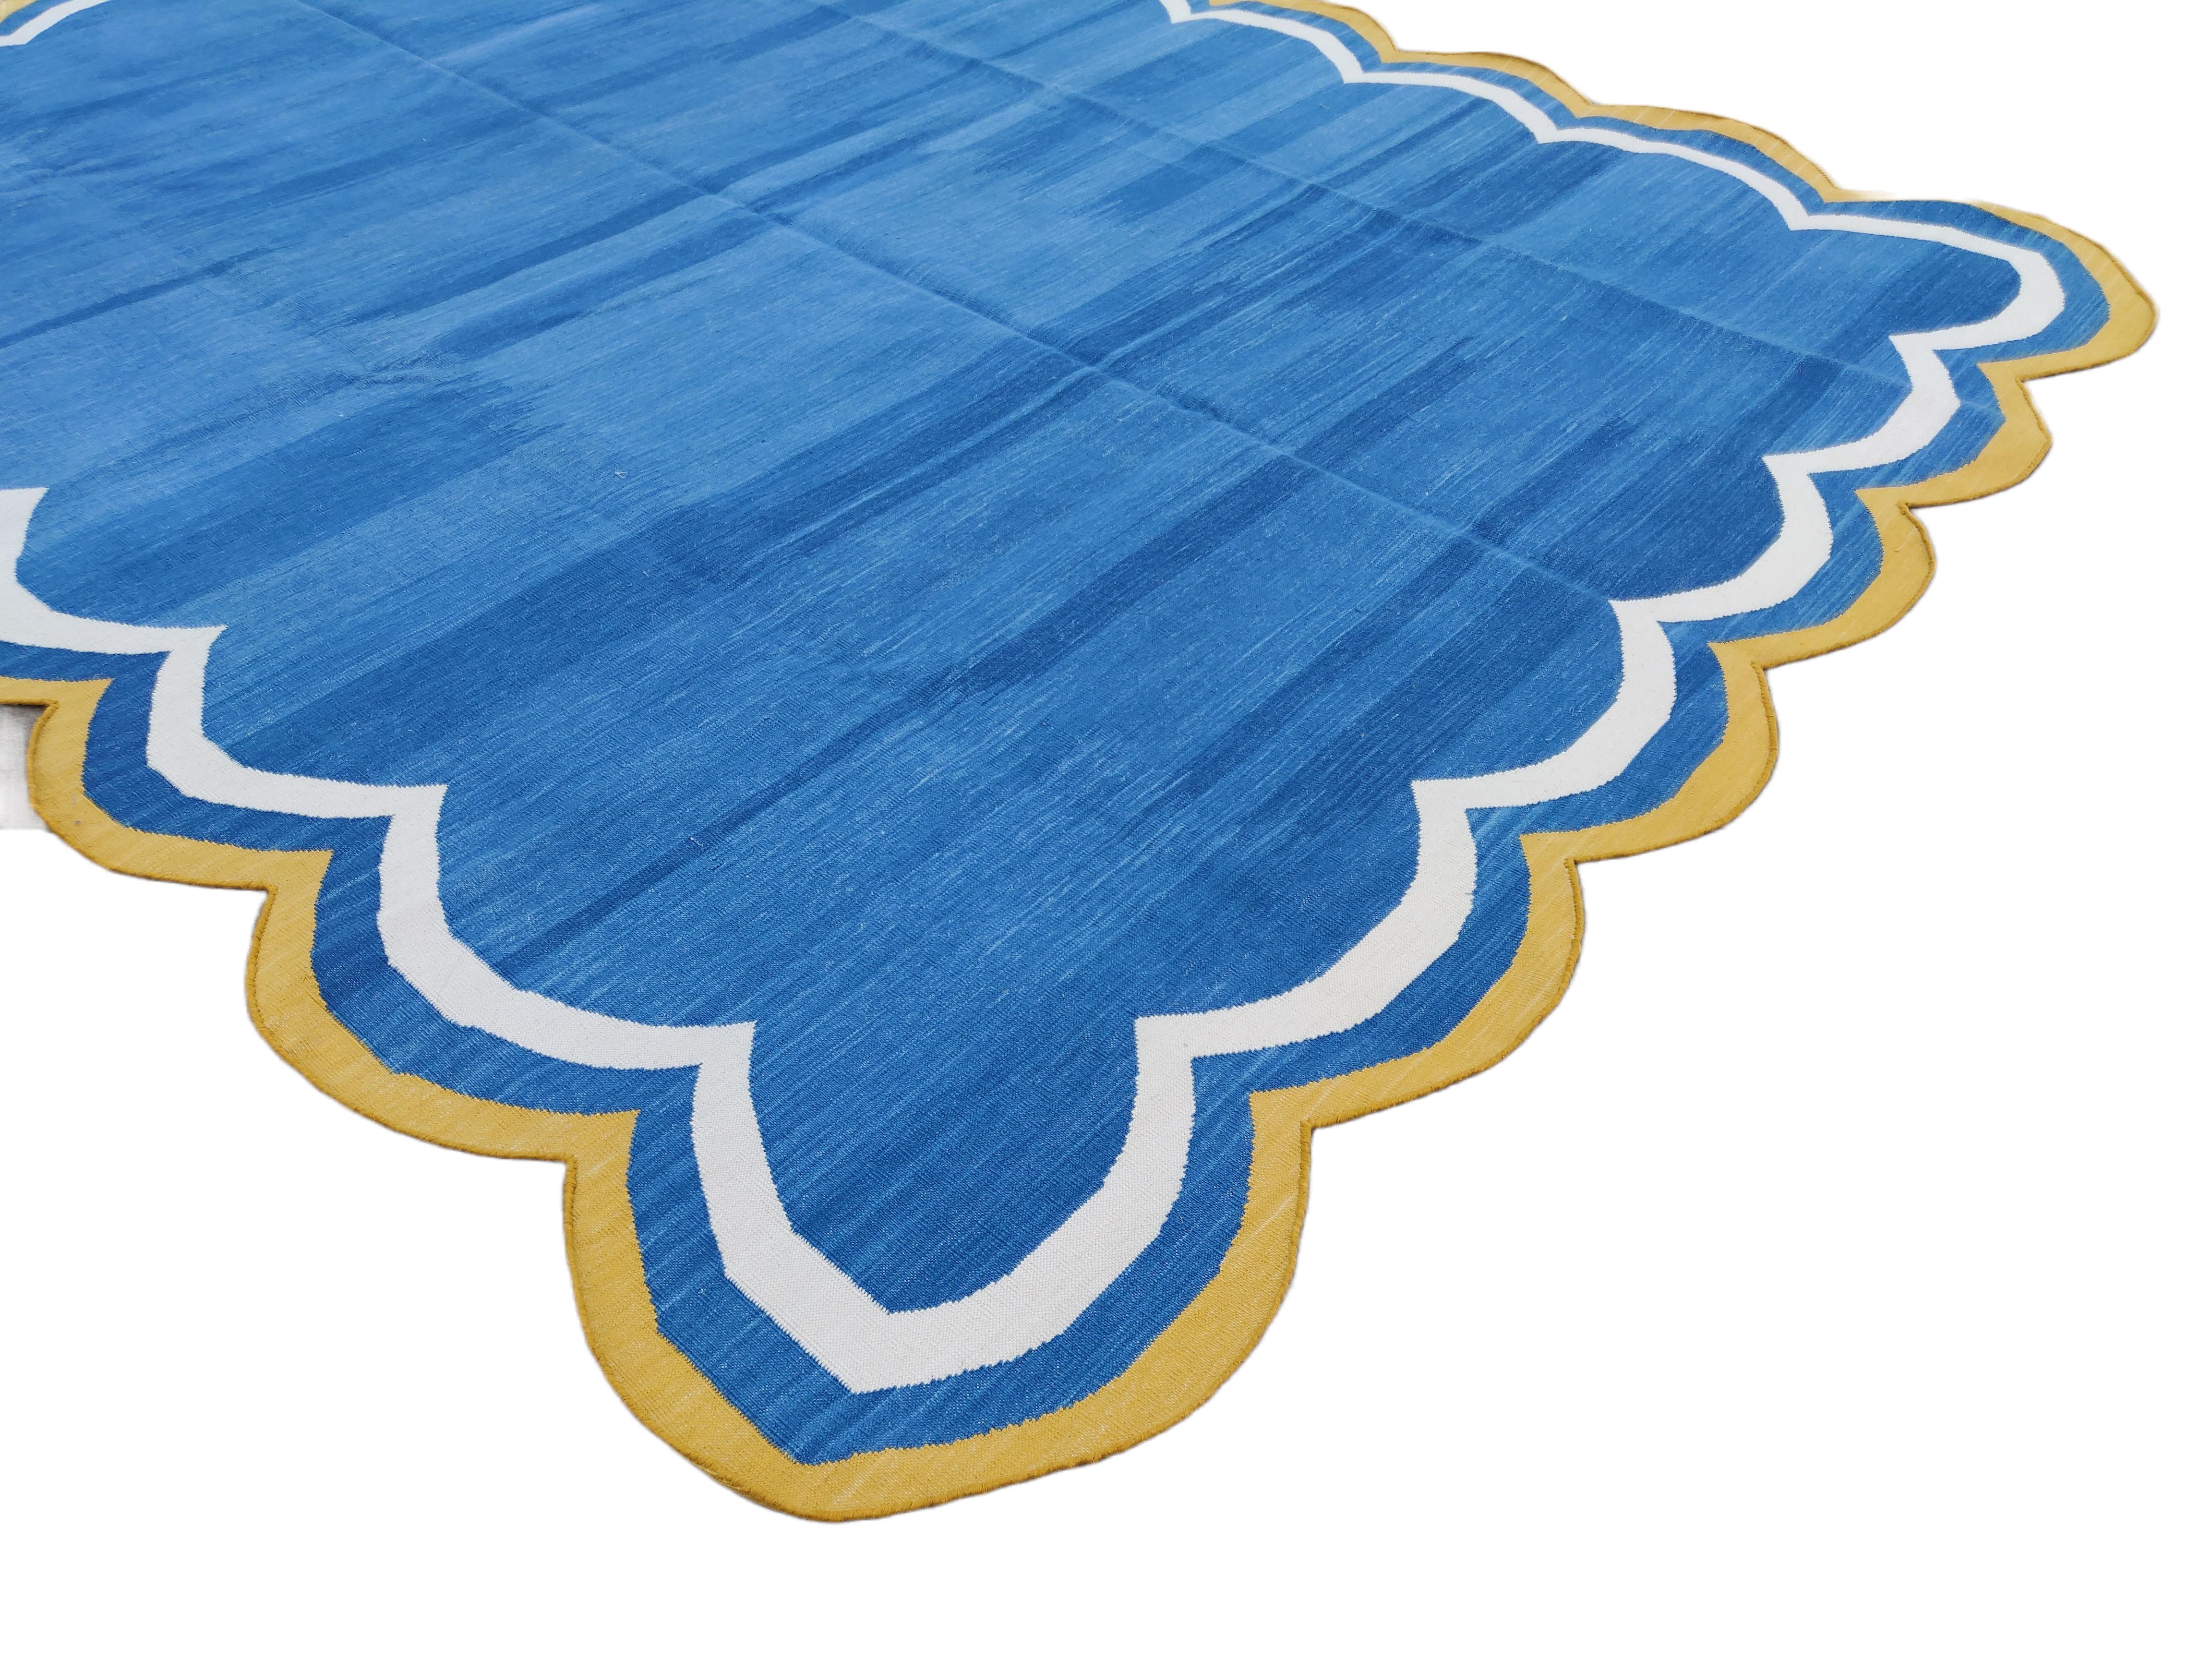 Mid-Century Modern Handmade Cotton Flat Weave Rug, 8x10 Blue And Yellow Scalloped Indian Dhurrie For Sale